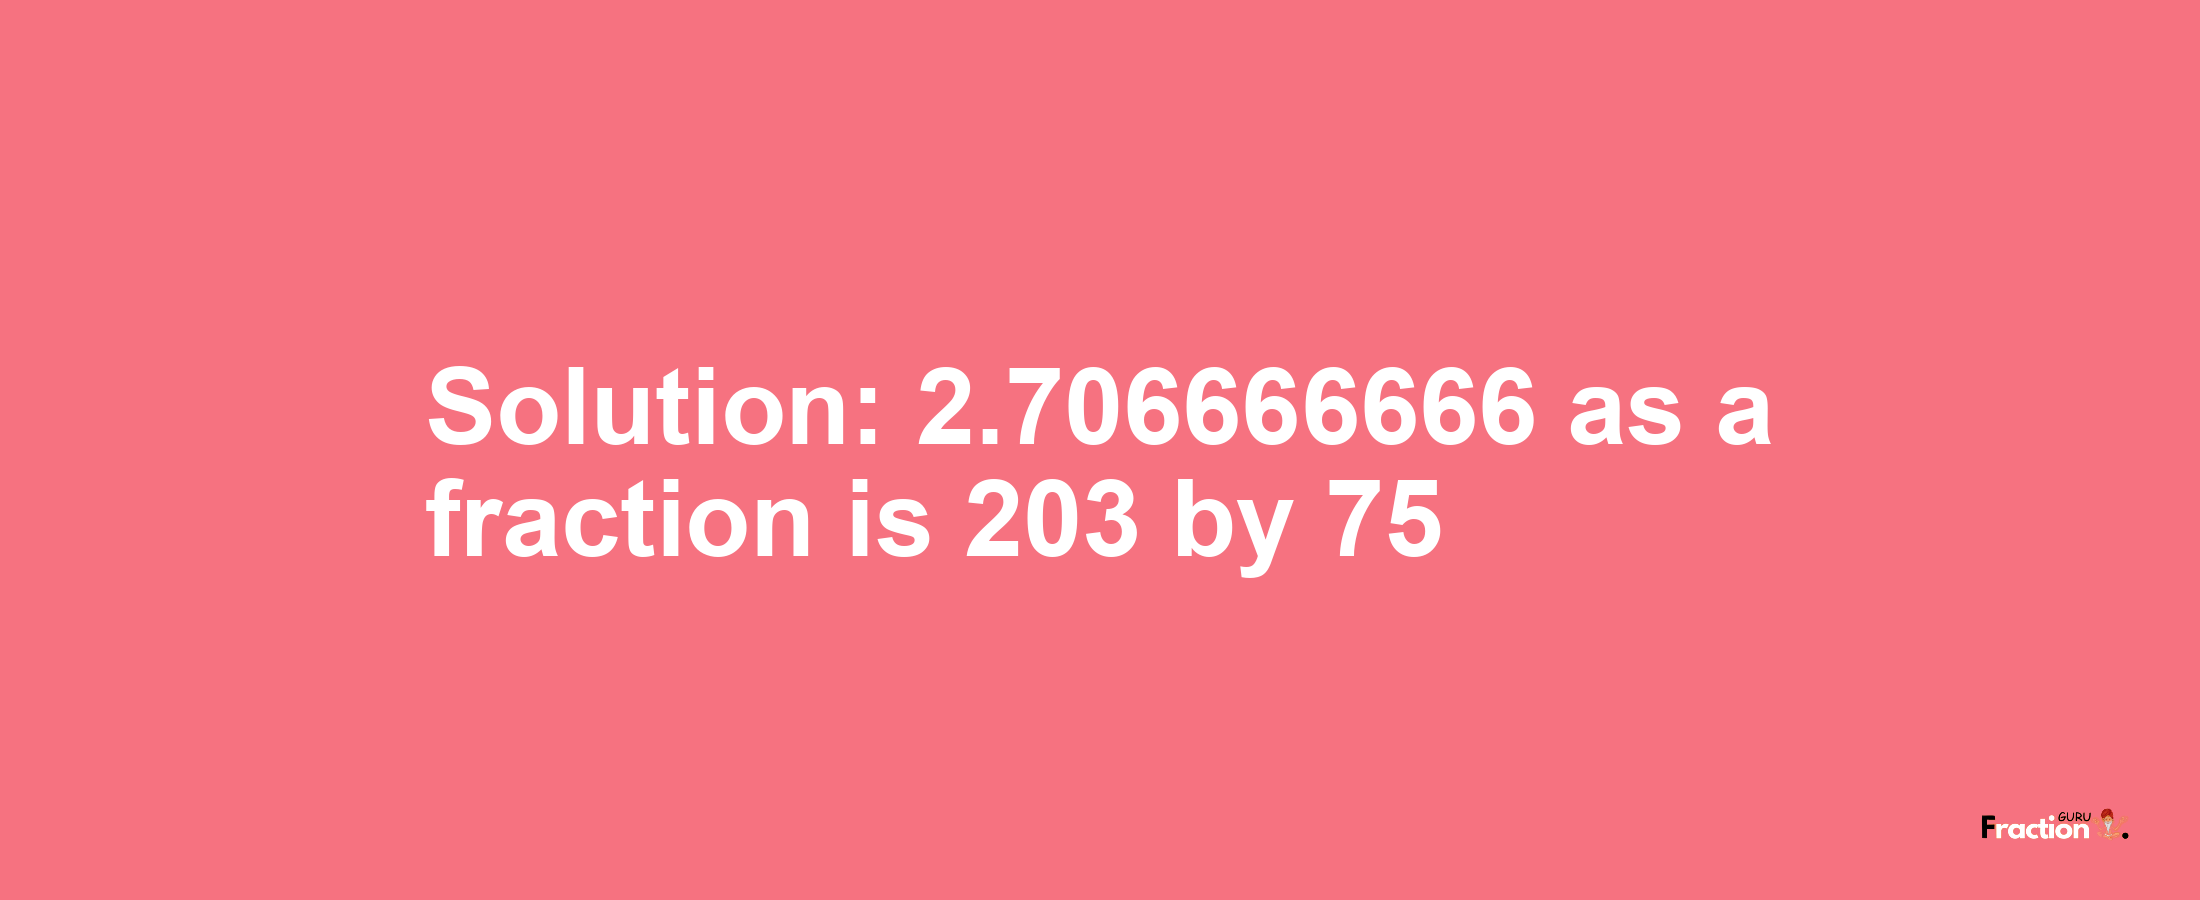 Solution:2.706666666 as a fraction is 203/75